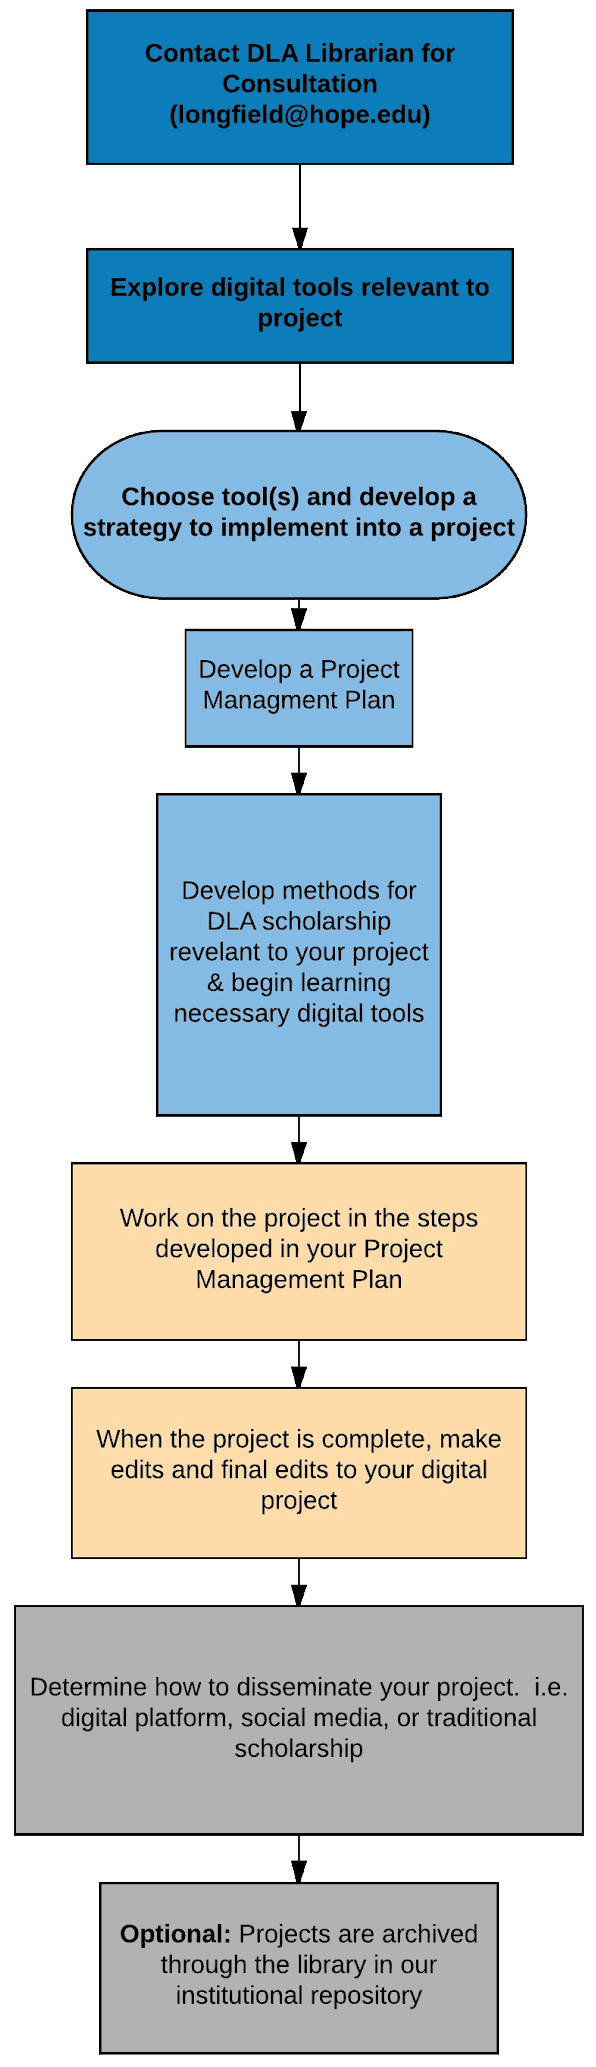 Flow chart showing the steps in a digital project